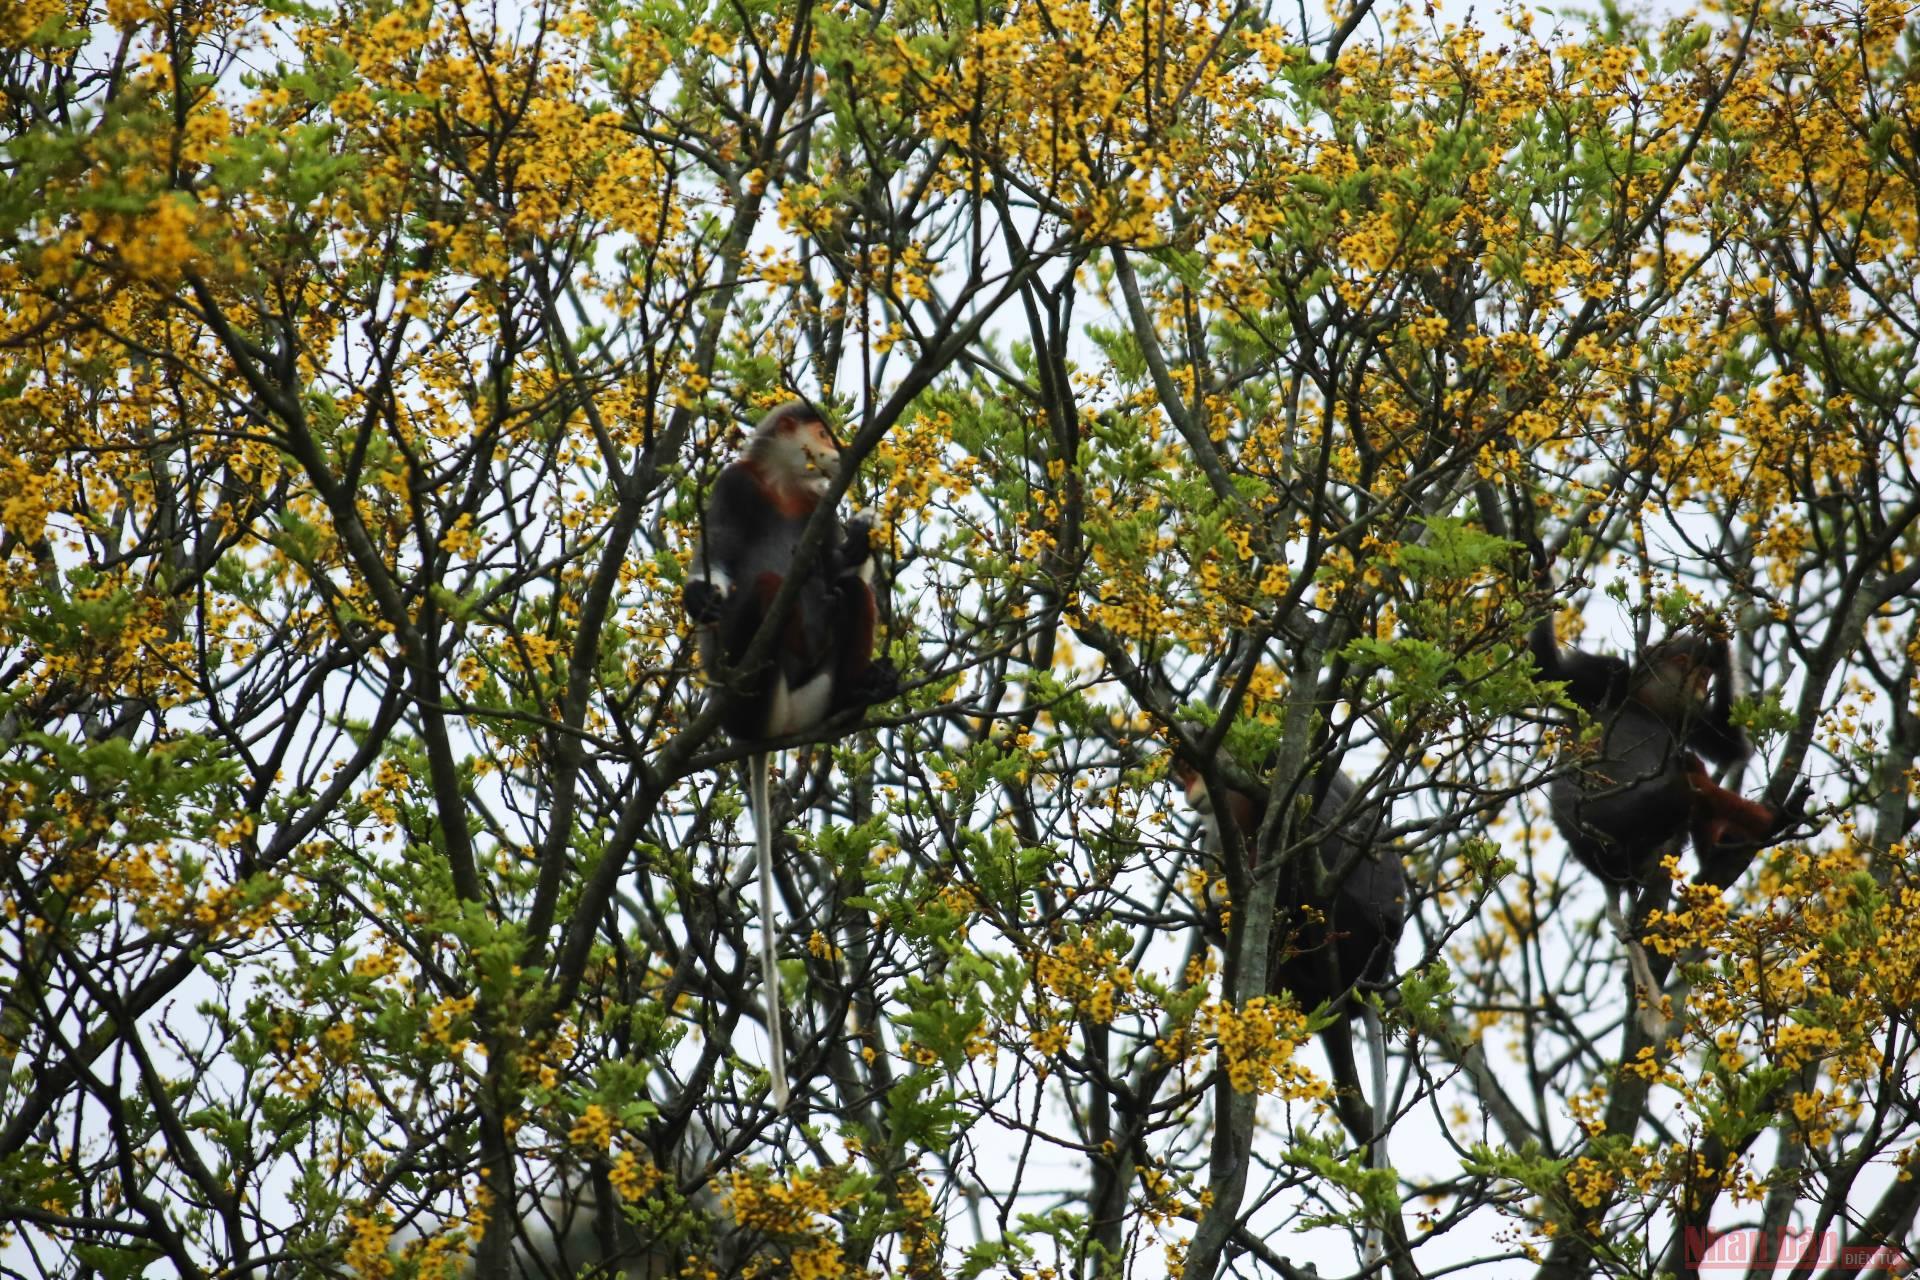 Brown-shanked doucs in yellow-flamboyant forest of Son Tra Peninsula